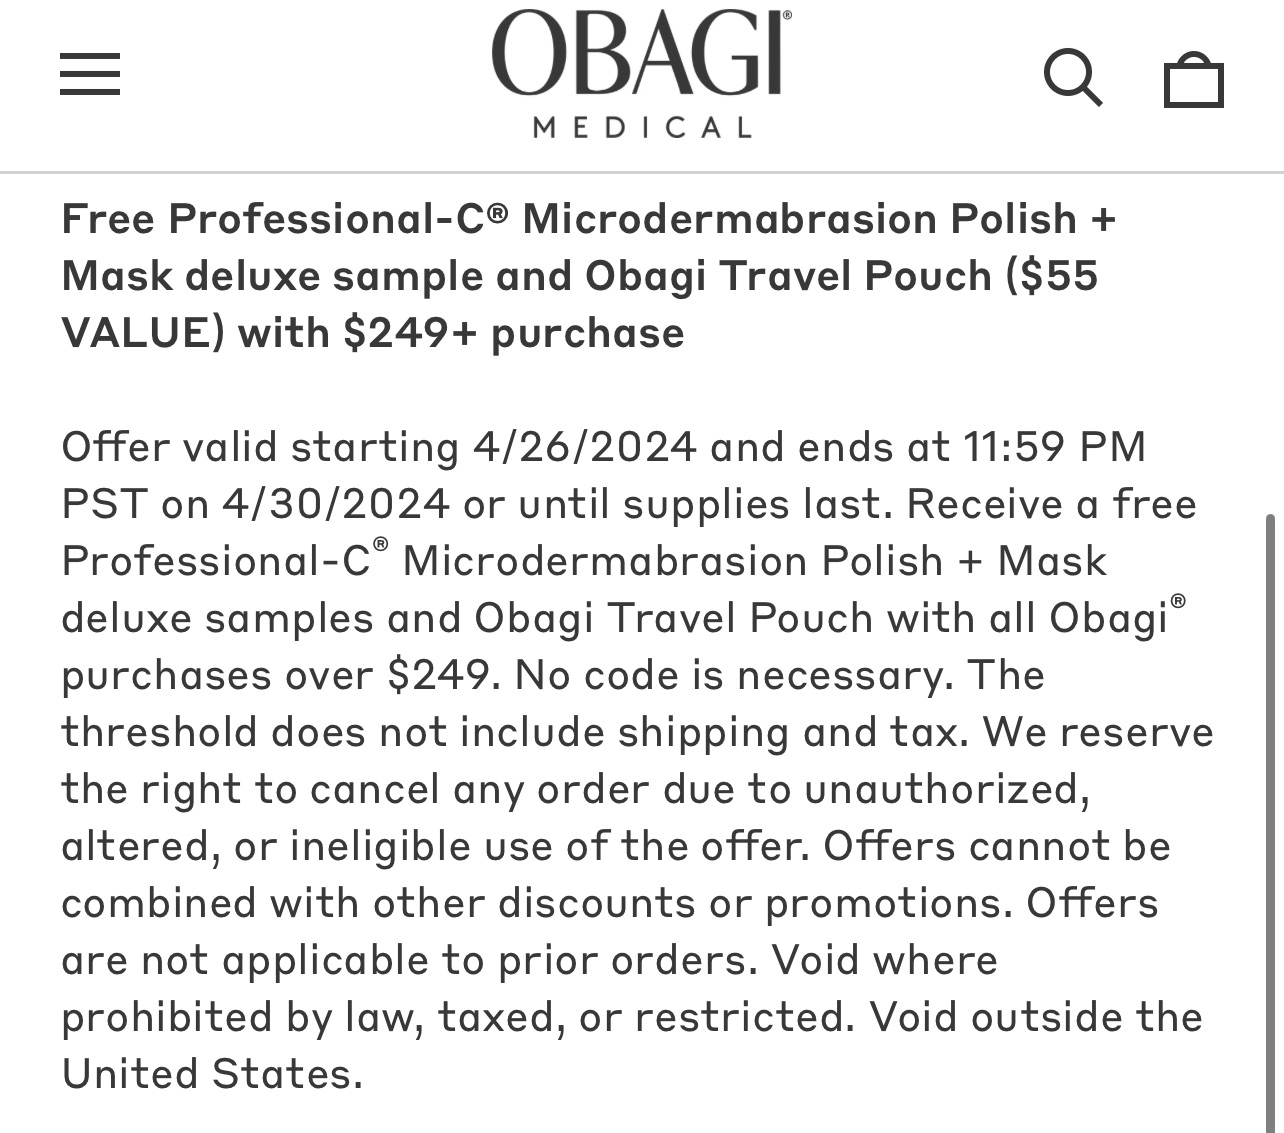 Obagi 满$249送 Professional-C Microdermabrasion Polish + Mask deluxe sample and Obagi Travel Pouch 价值$55